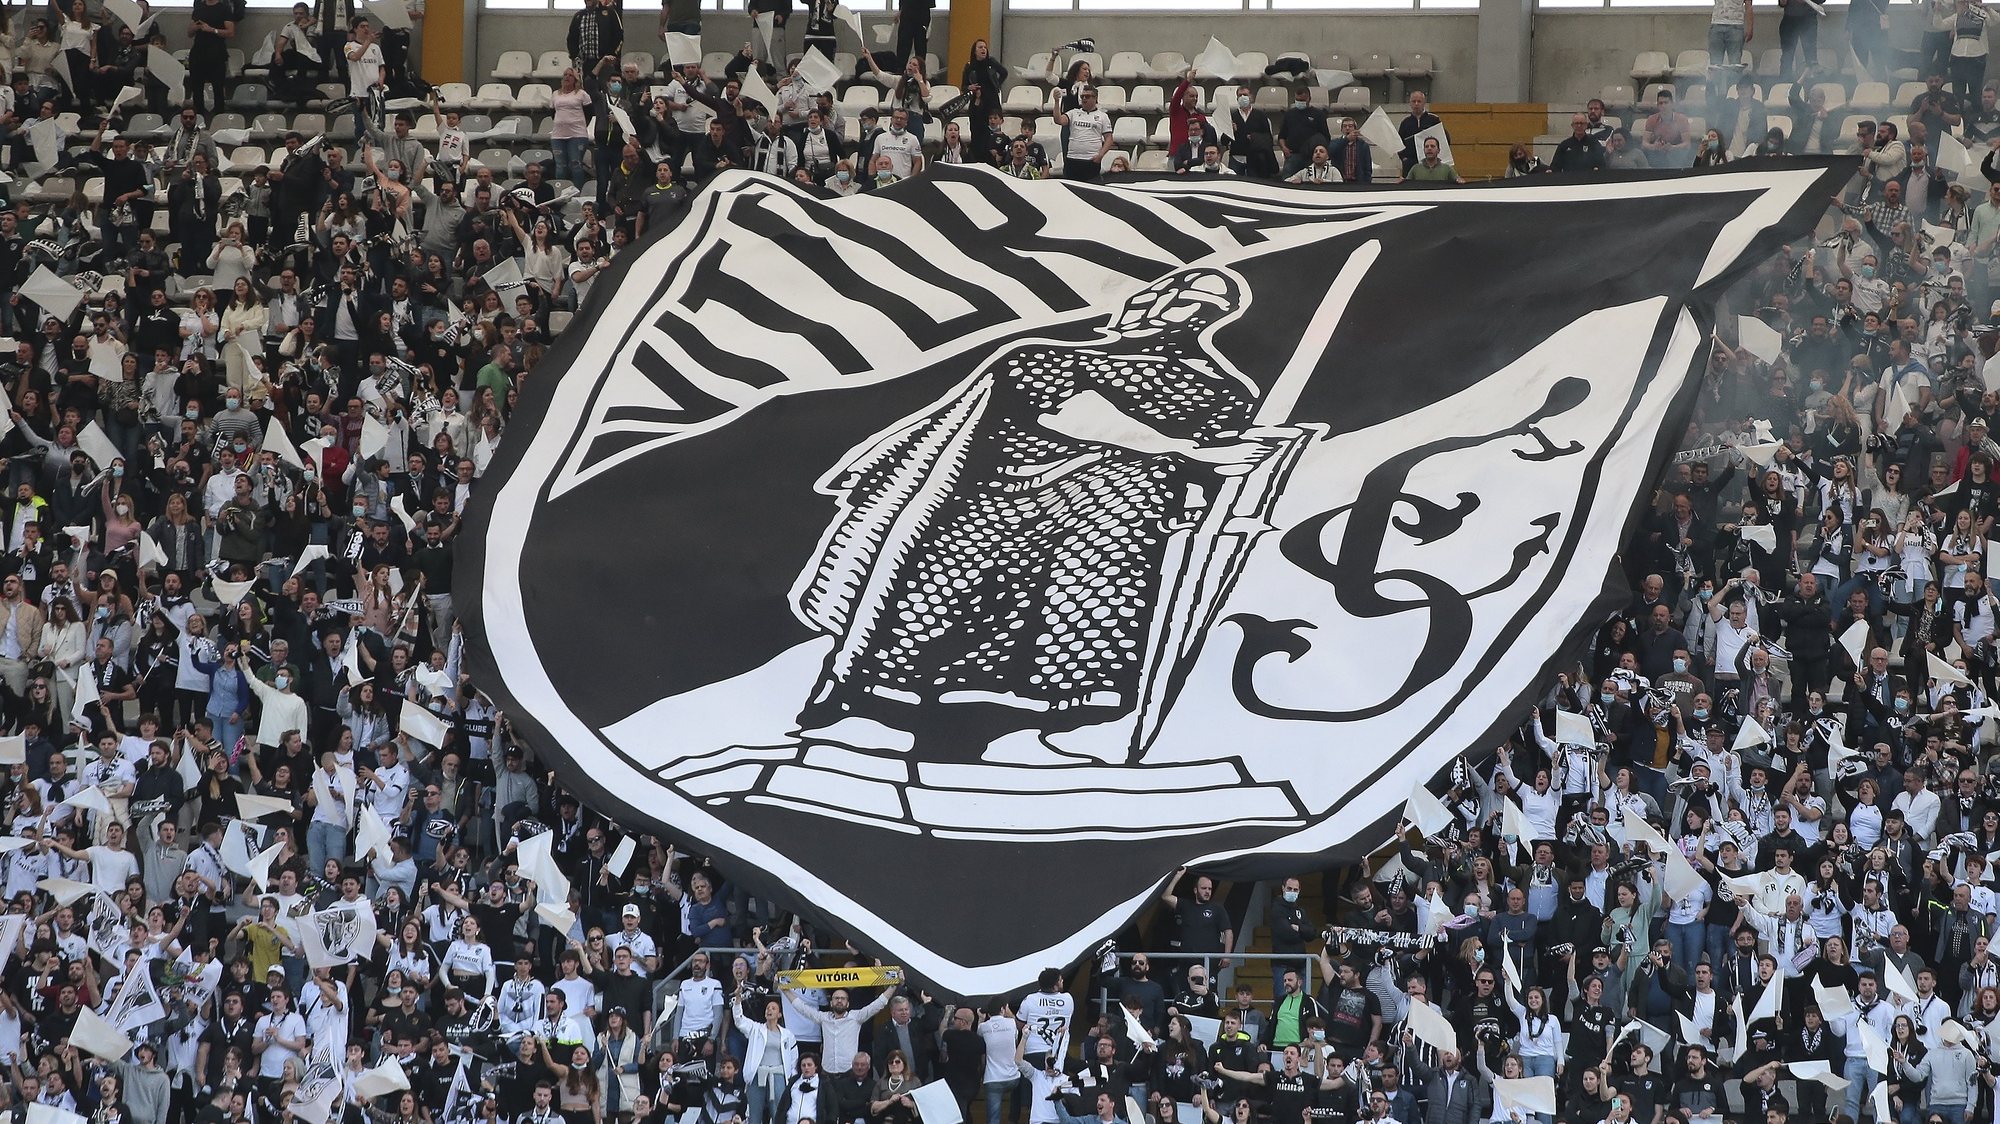 Vitoria de Guimaraes` fans during their Portuguese First First League soccer match with FC Porto held at D. Afonso Henriques Stadium in Guimarães, Portugal 10th April 2022. MANUEL FERNANDO ARAUJO/LUSA